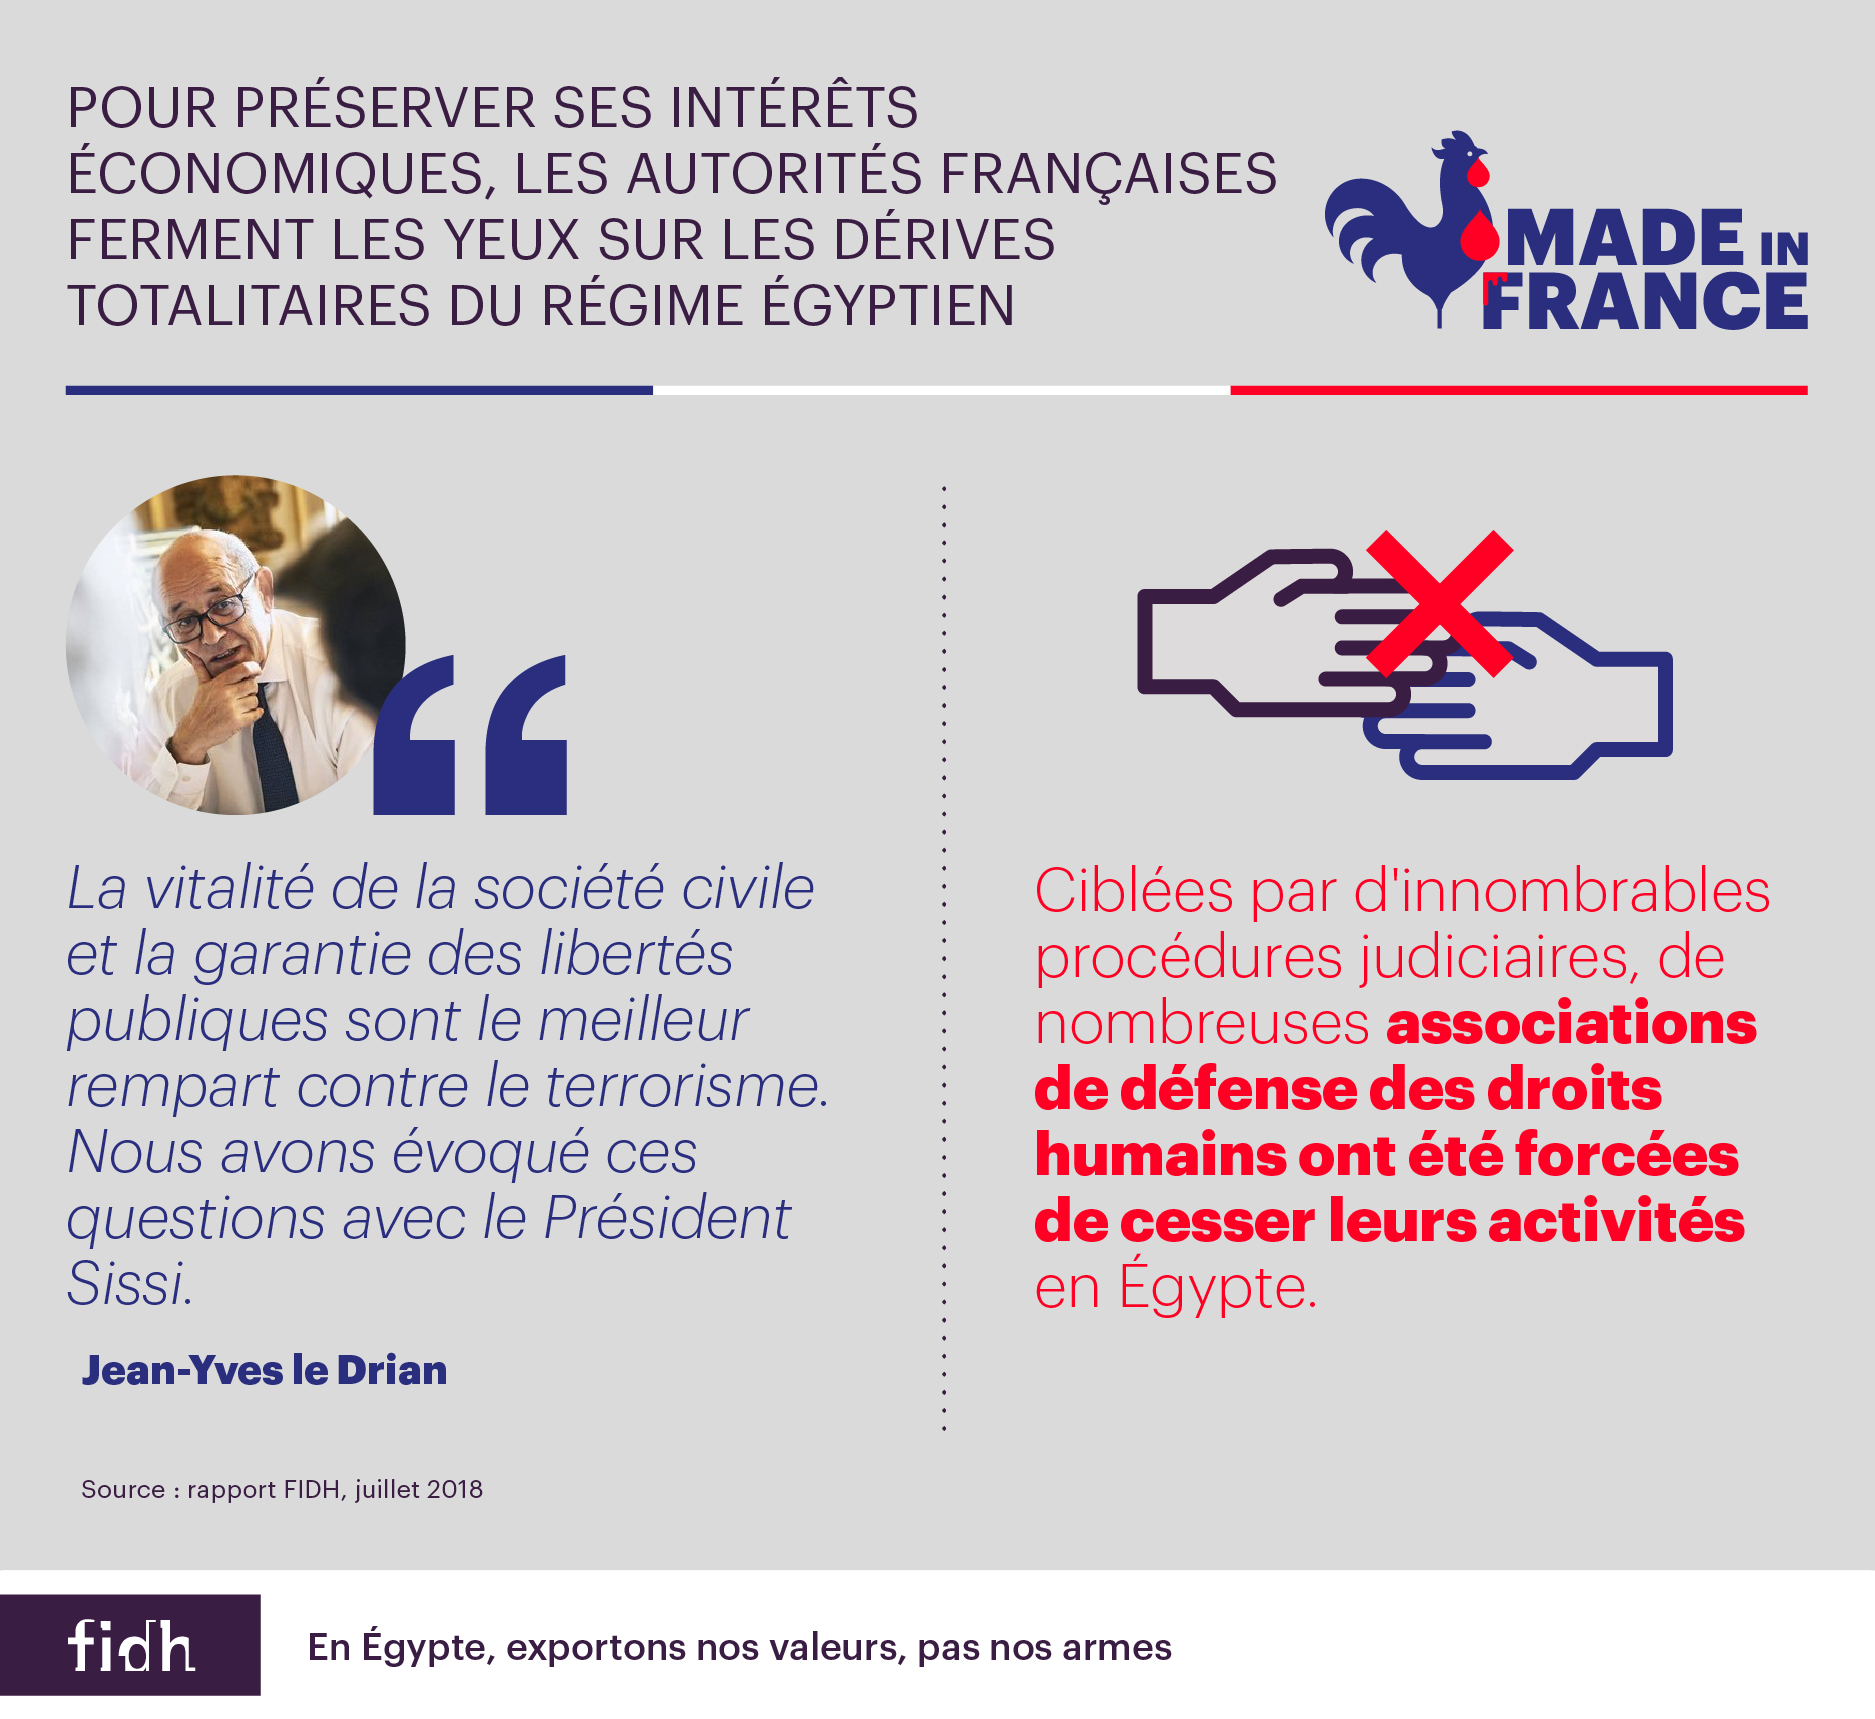 FIDH_MADEINFRANCE_08